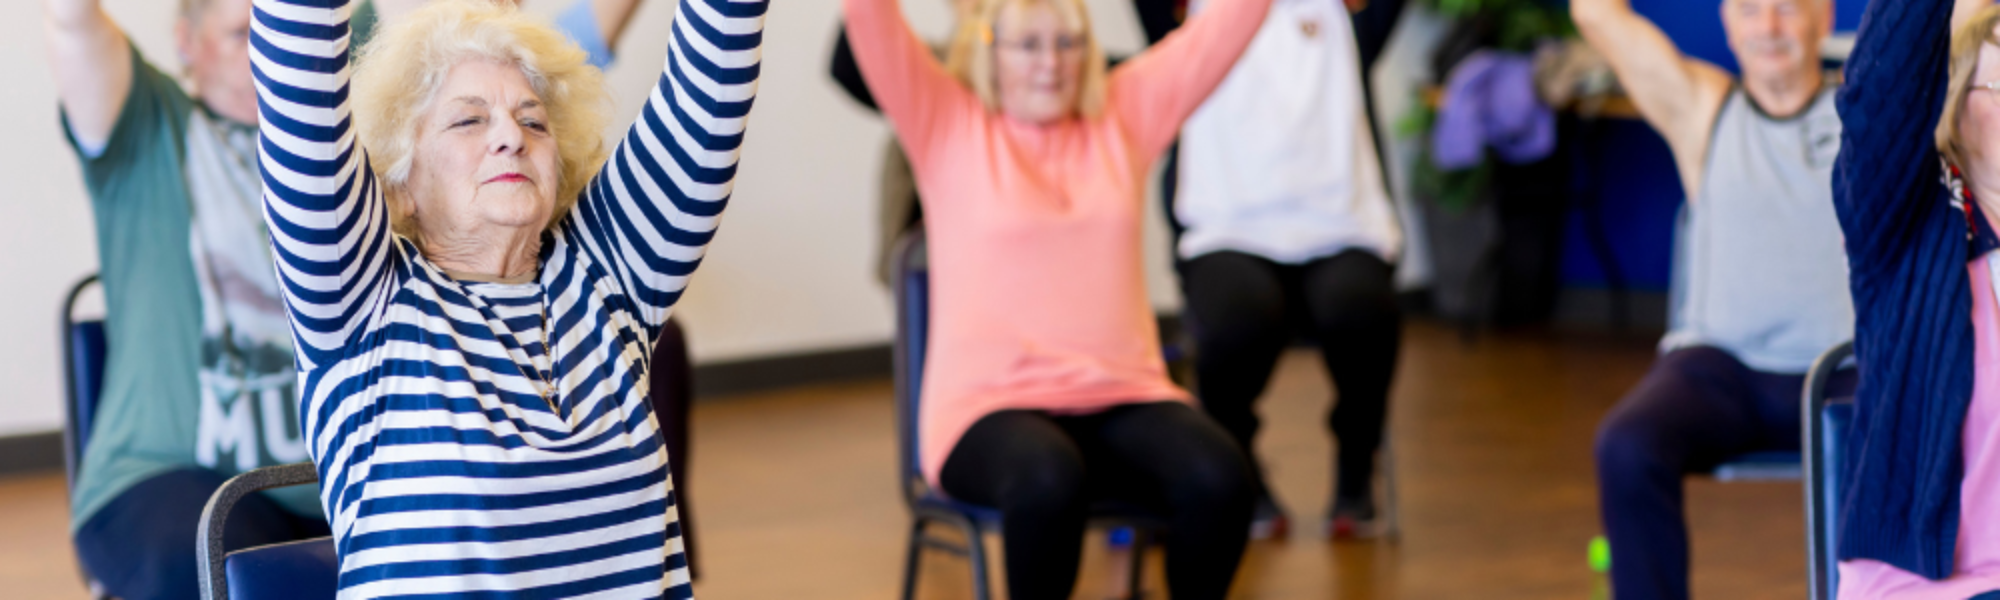 Posture Exercises Seniors: The Best Way to Healthy Living Now